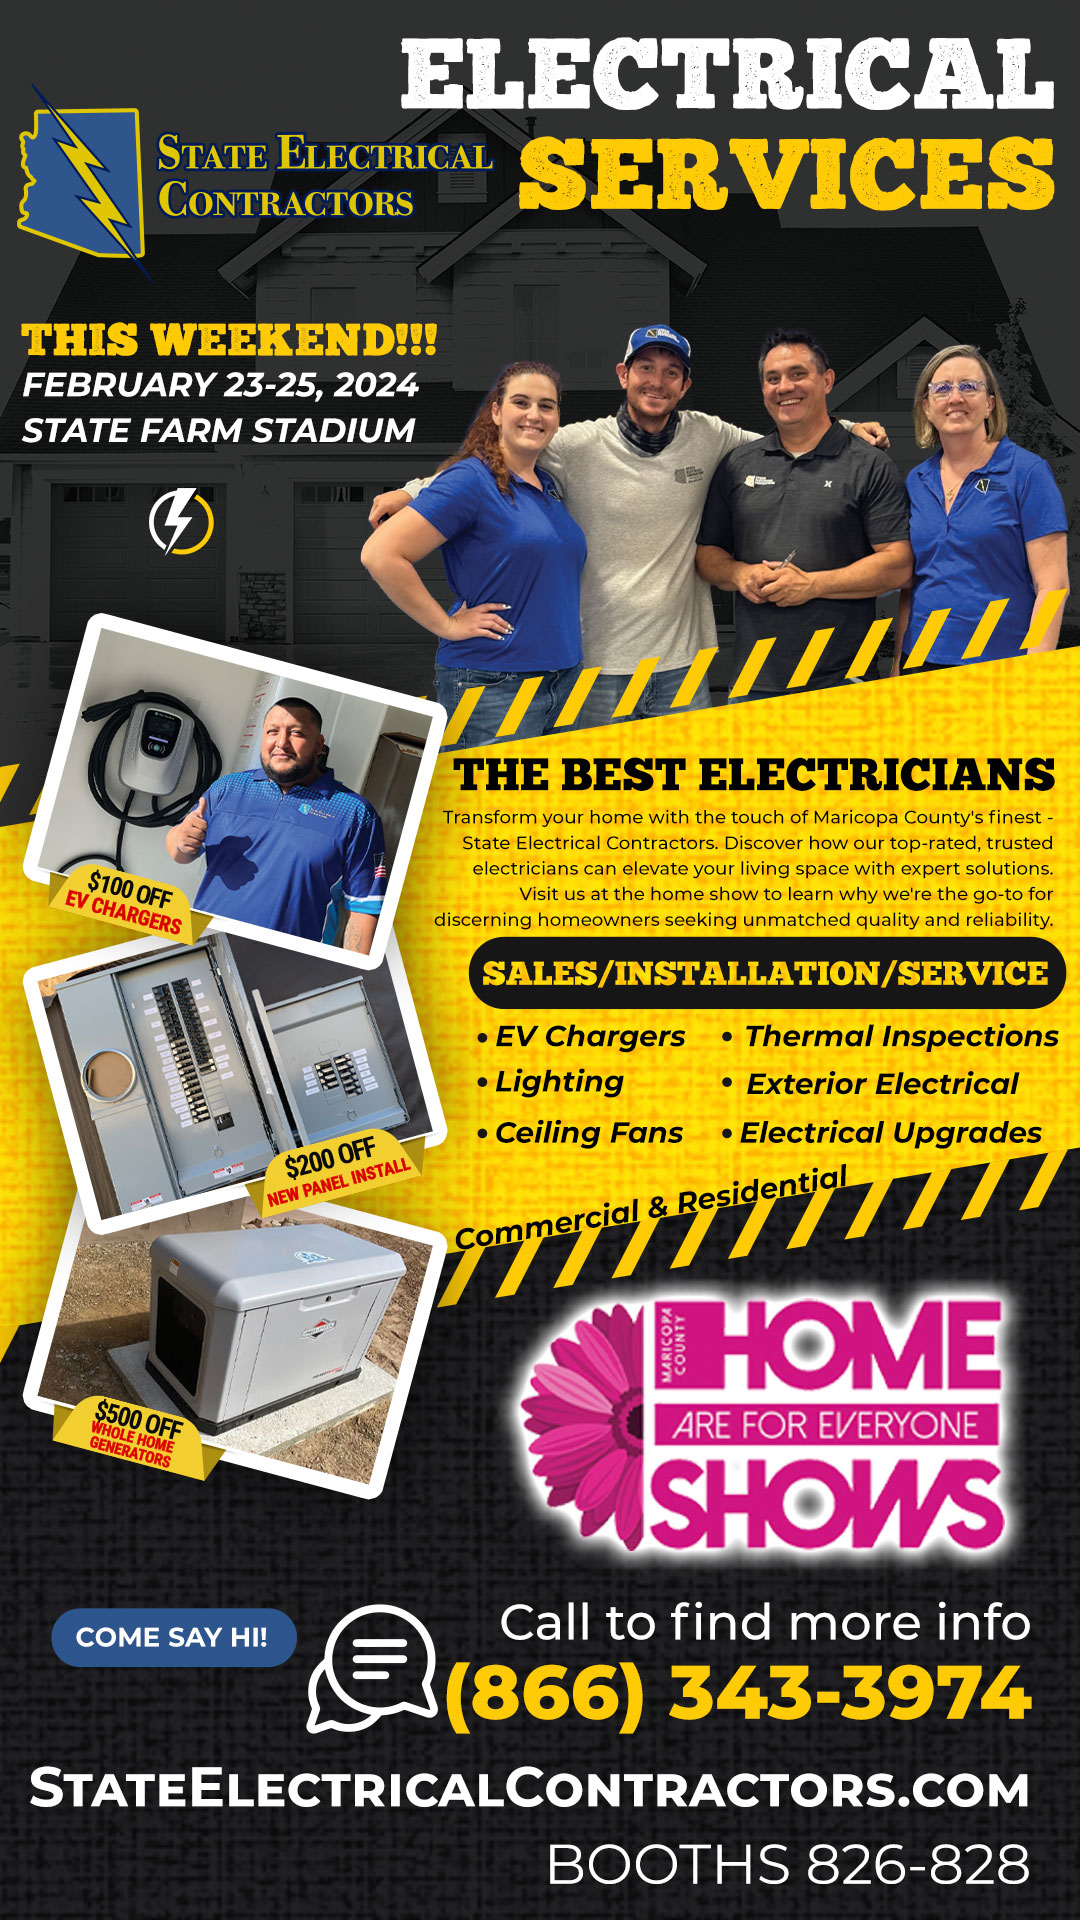 Save big on EV chargers, panel installs, and whole-home generators with State Electrical Contractors at the Maricopa County Home Show, Feb 23-25, 2024. Visit us at State Farm Stadium for expert advice and special offers